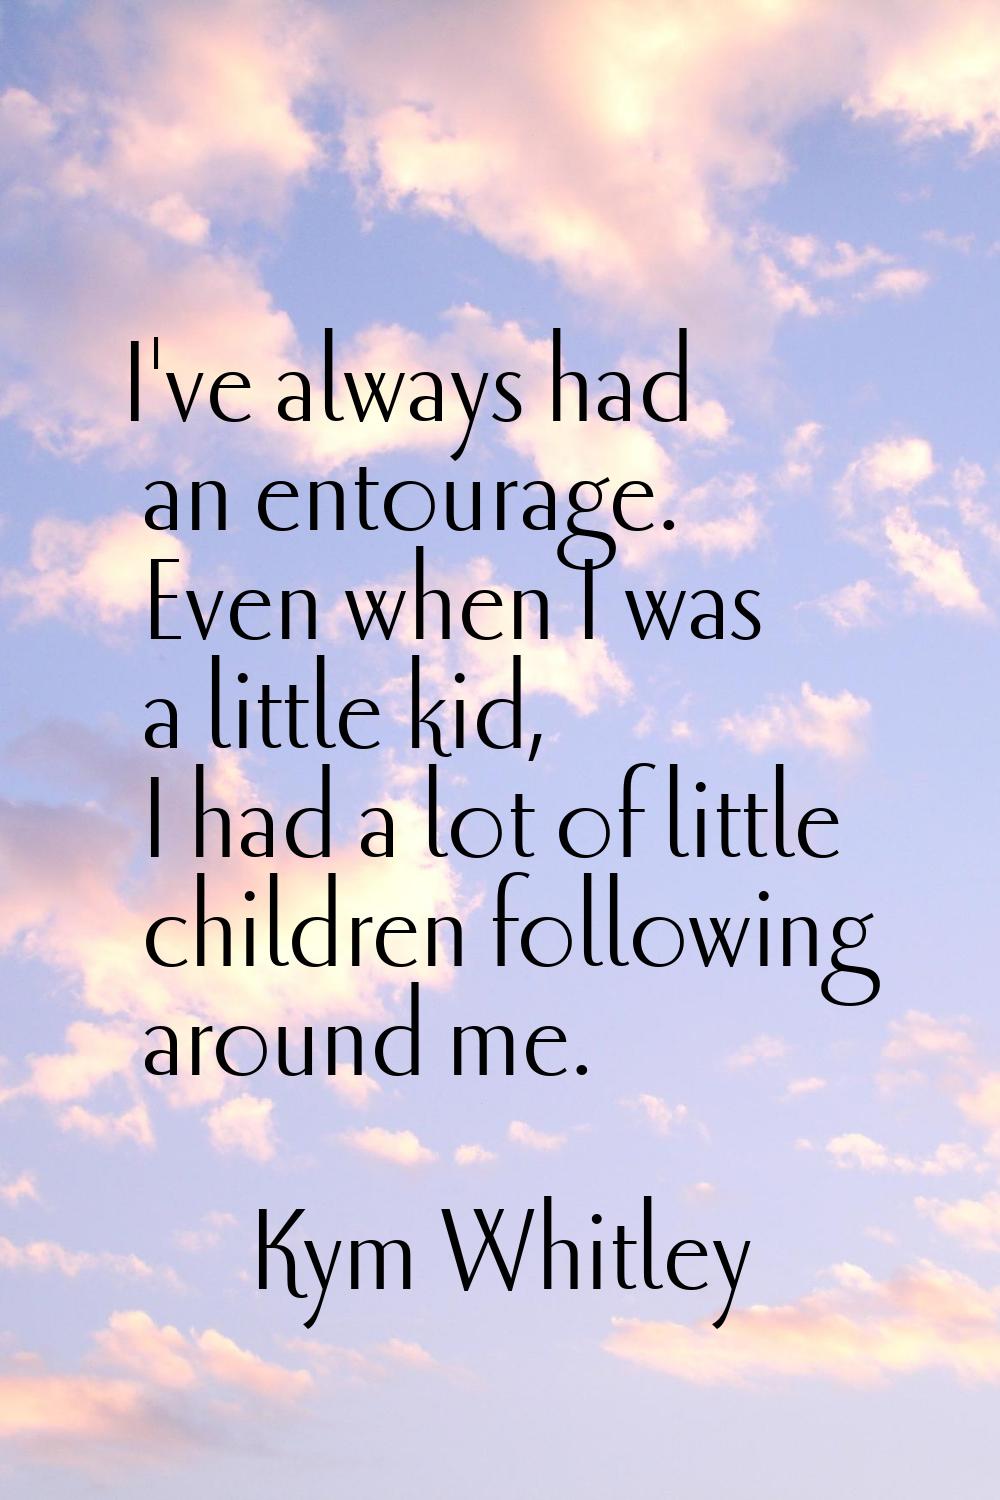 I've always had an entourage. Even when I was a little kid, I had a lot of little children followin